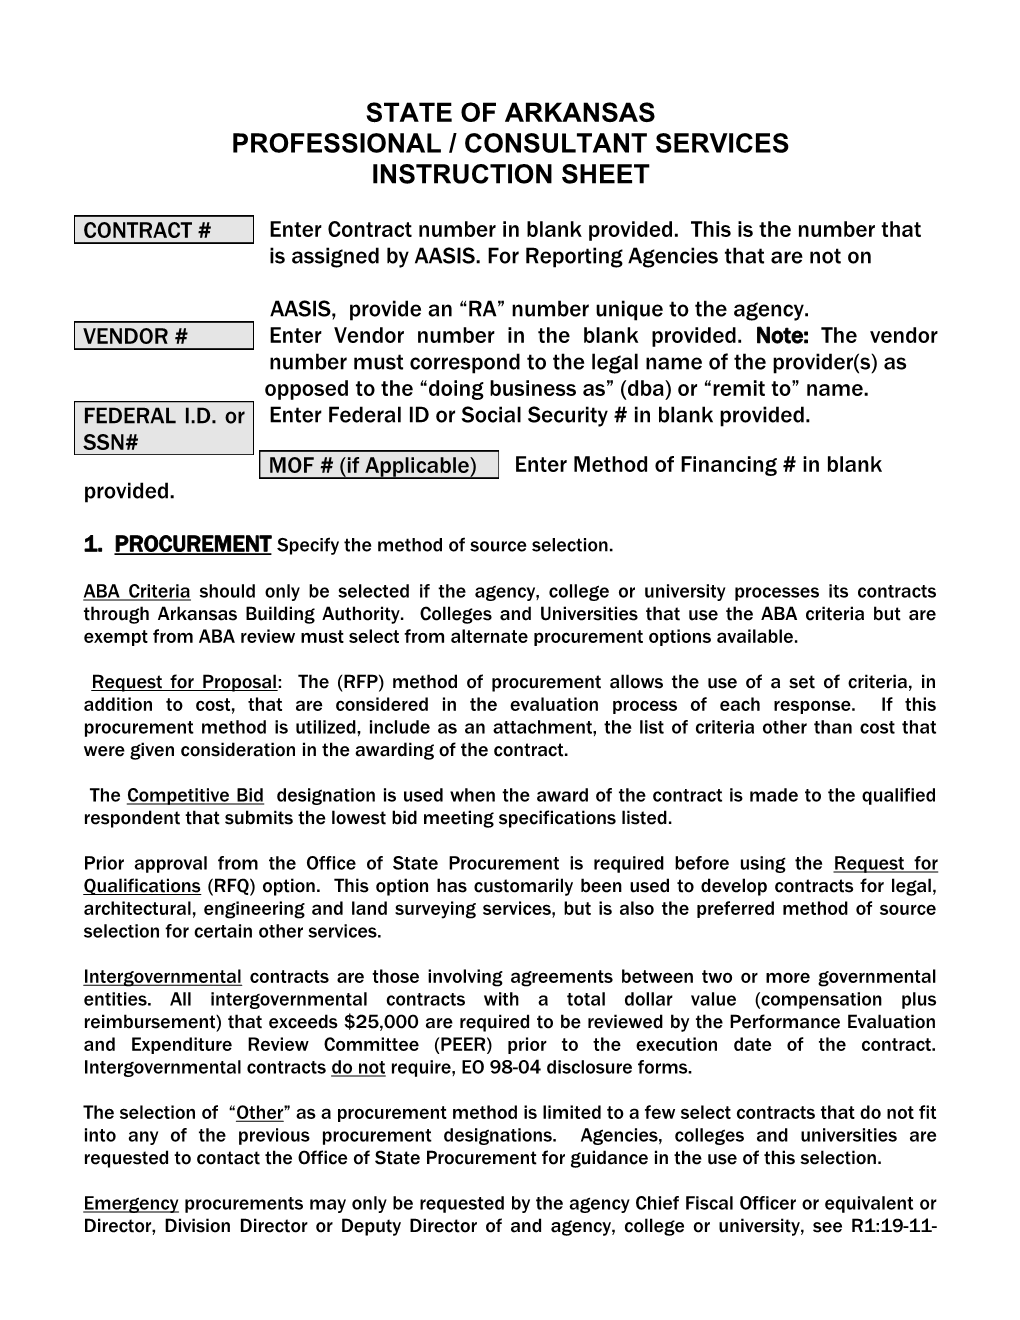 Professional and Consultant Service Contract Instruction Sheet